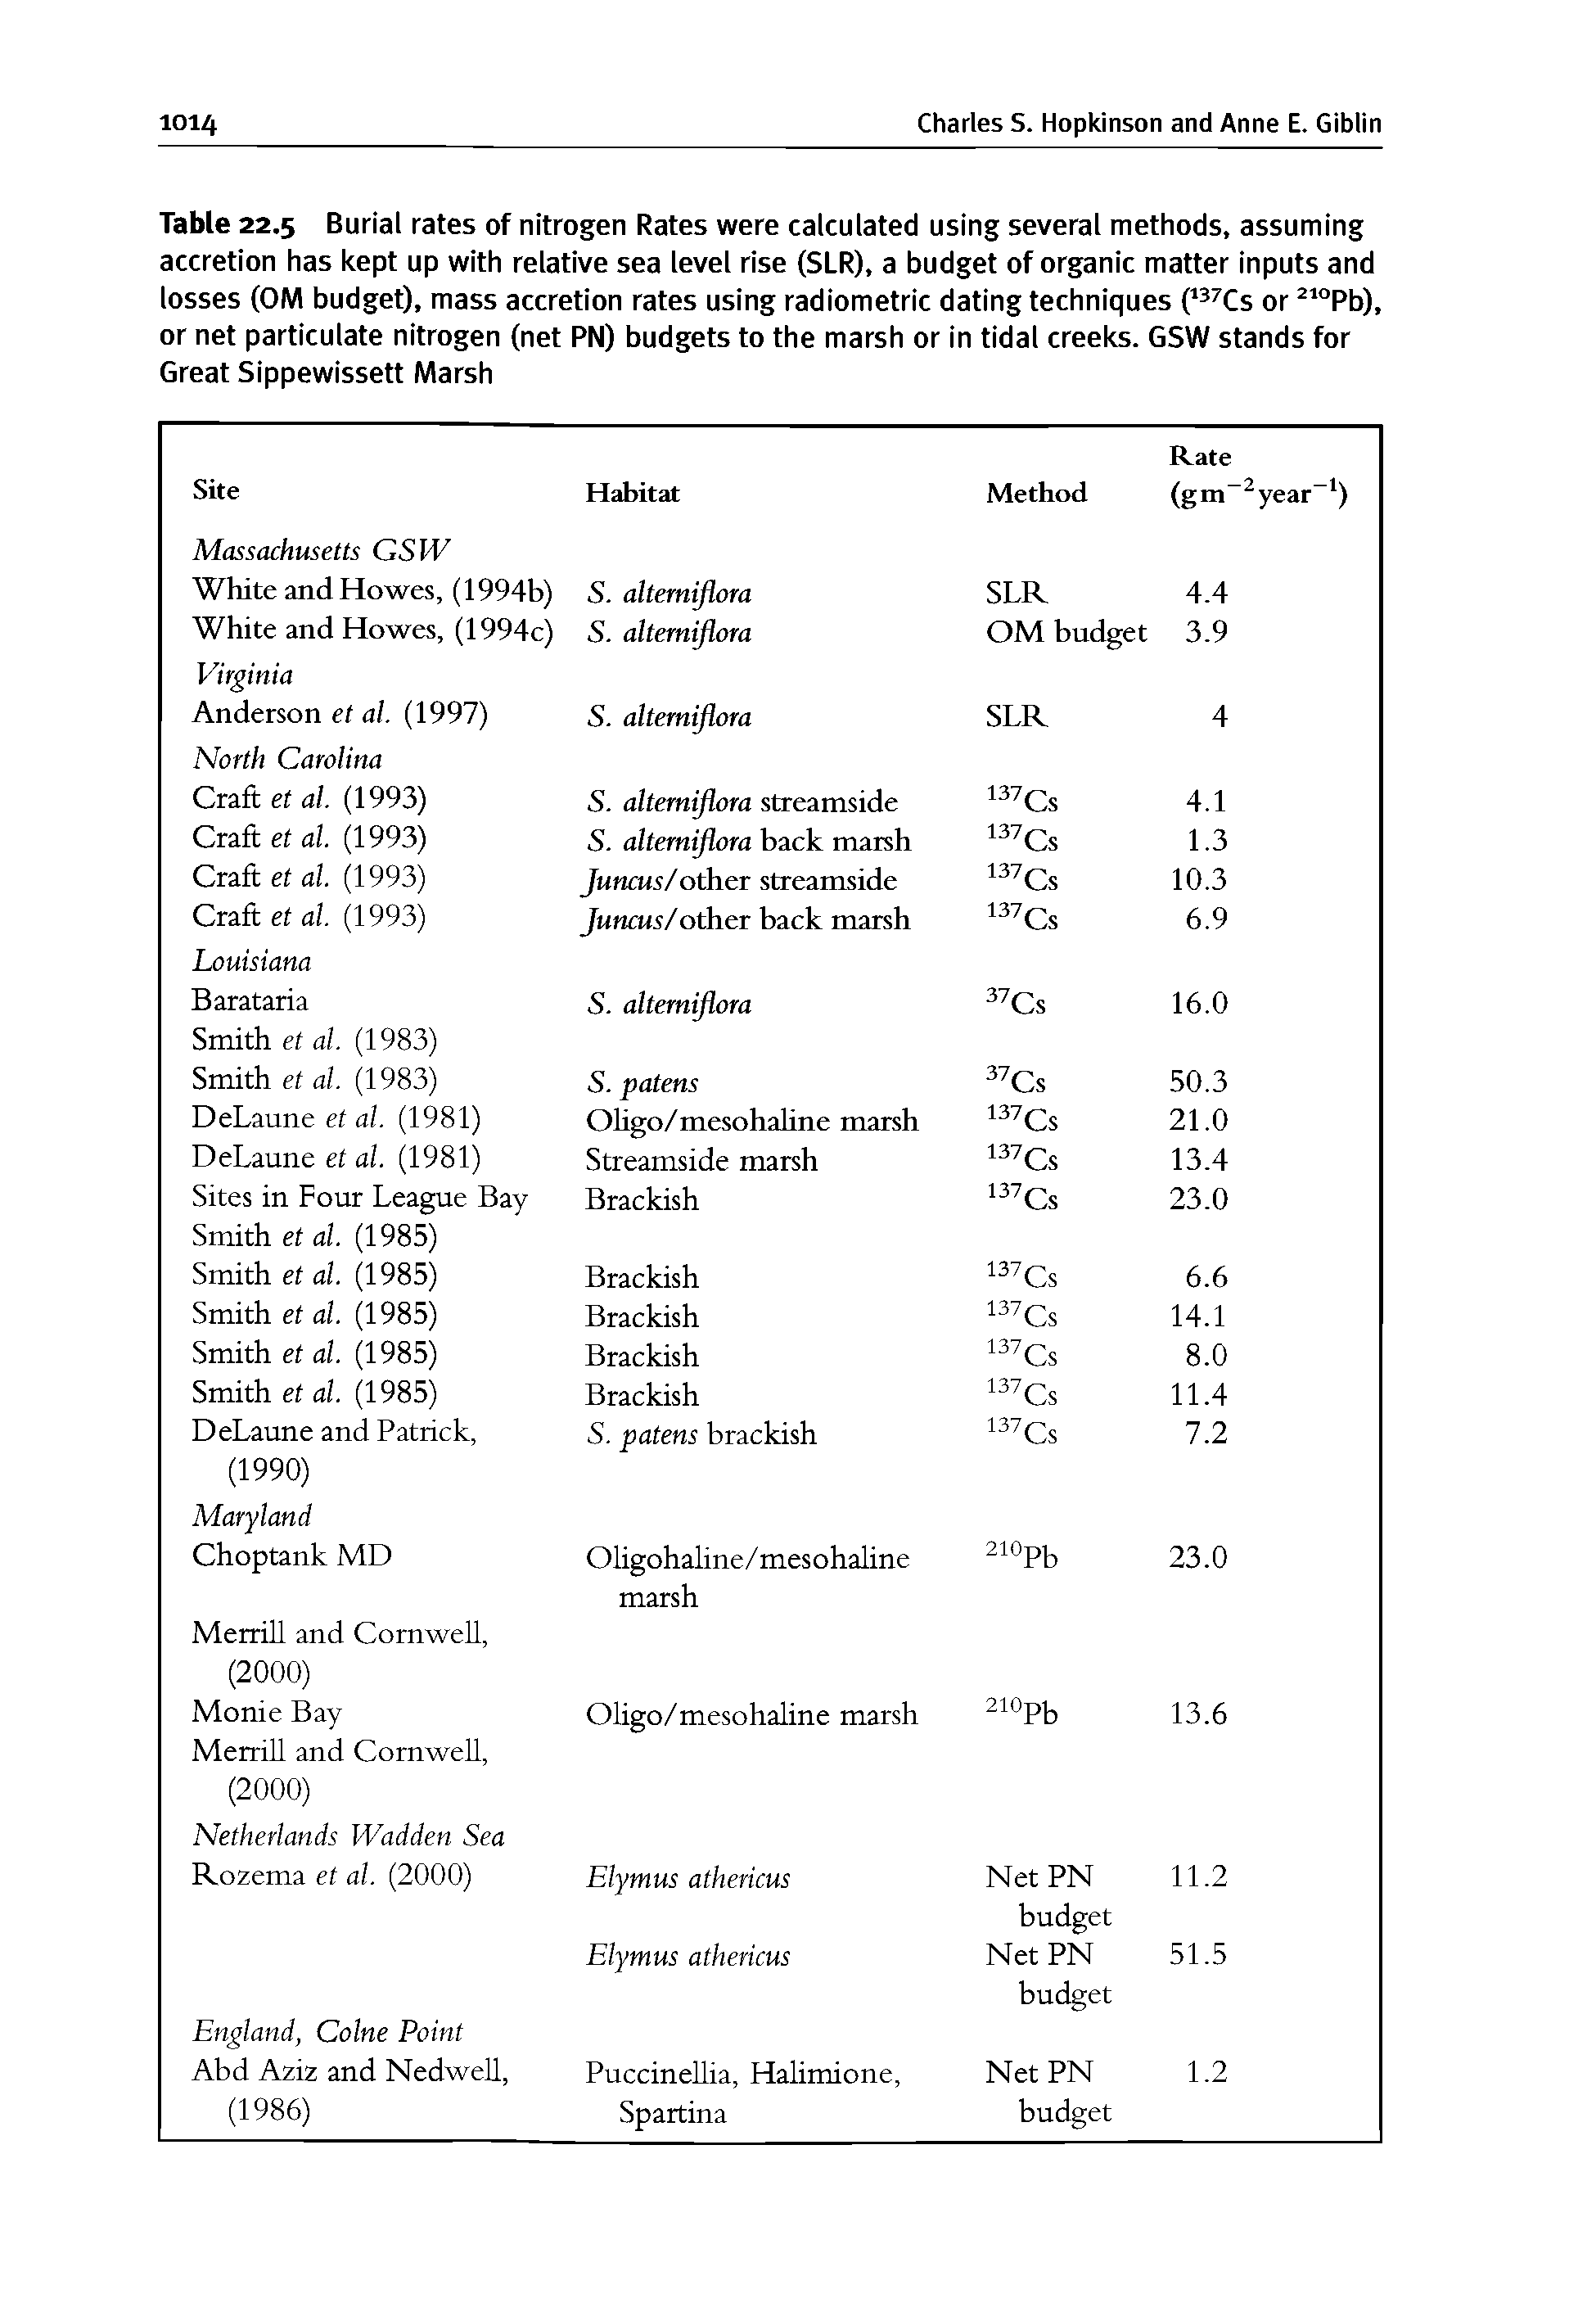 Table 22.5 Burial rates of nitrogen Rates were calculated using several methods, assuming accretion has kept up with relative sea level rise (SLR), a budget of organic matter inputs and losses (OM budget), mass accretion rates using radiometric dating techniques ( Cs or Pb), or net particulate nitrogen (net PN) budgets to the marsh or in tidal creeks. GSW stands for Great Sippewissett Marsh...